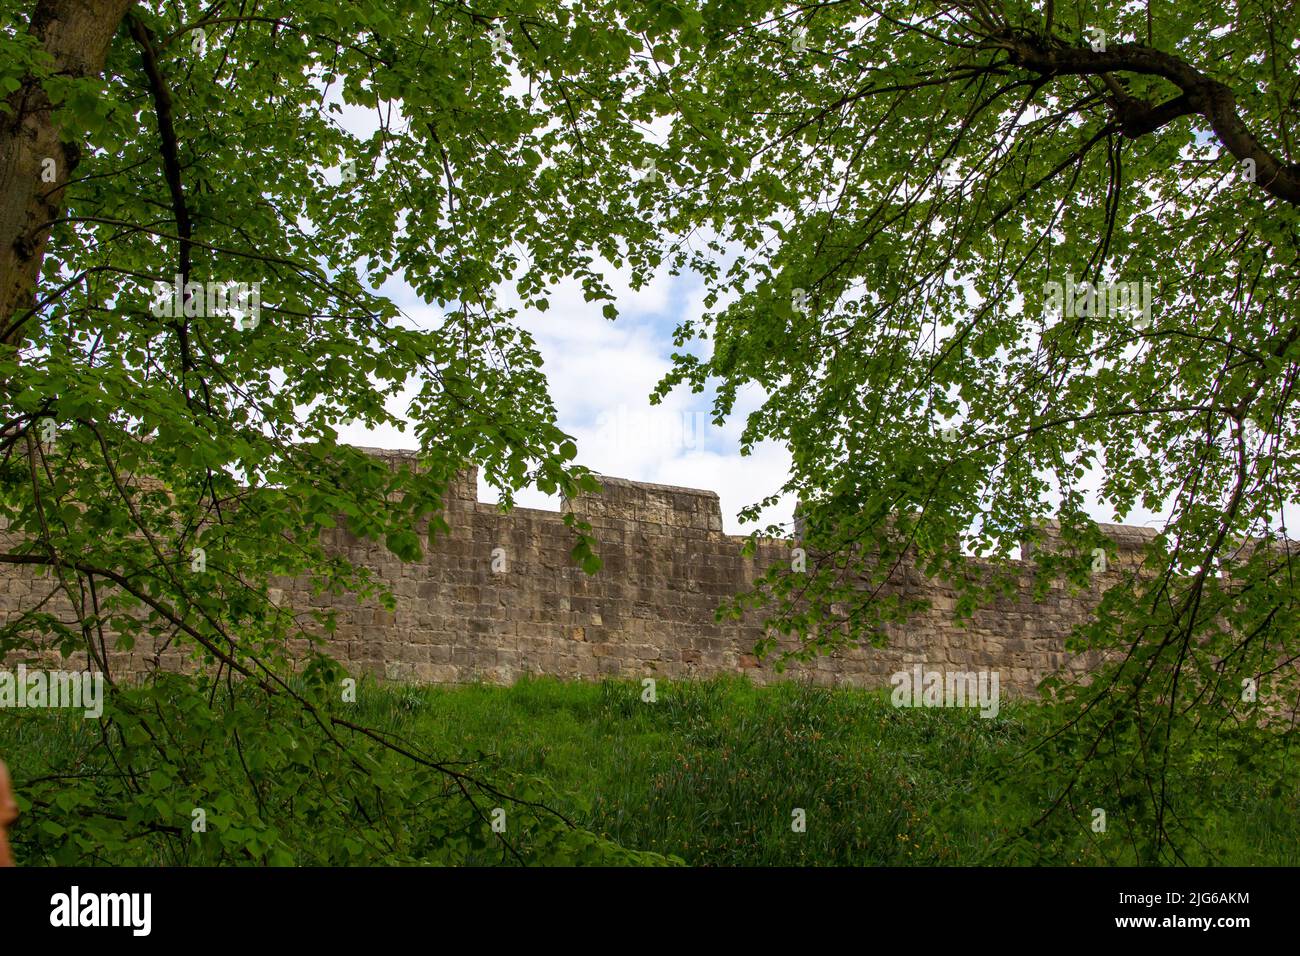 Close up landscape view of the medieval fortified walls that encircle the city of York in England, built in the 13th and 14th centuries Stock Photo